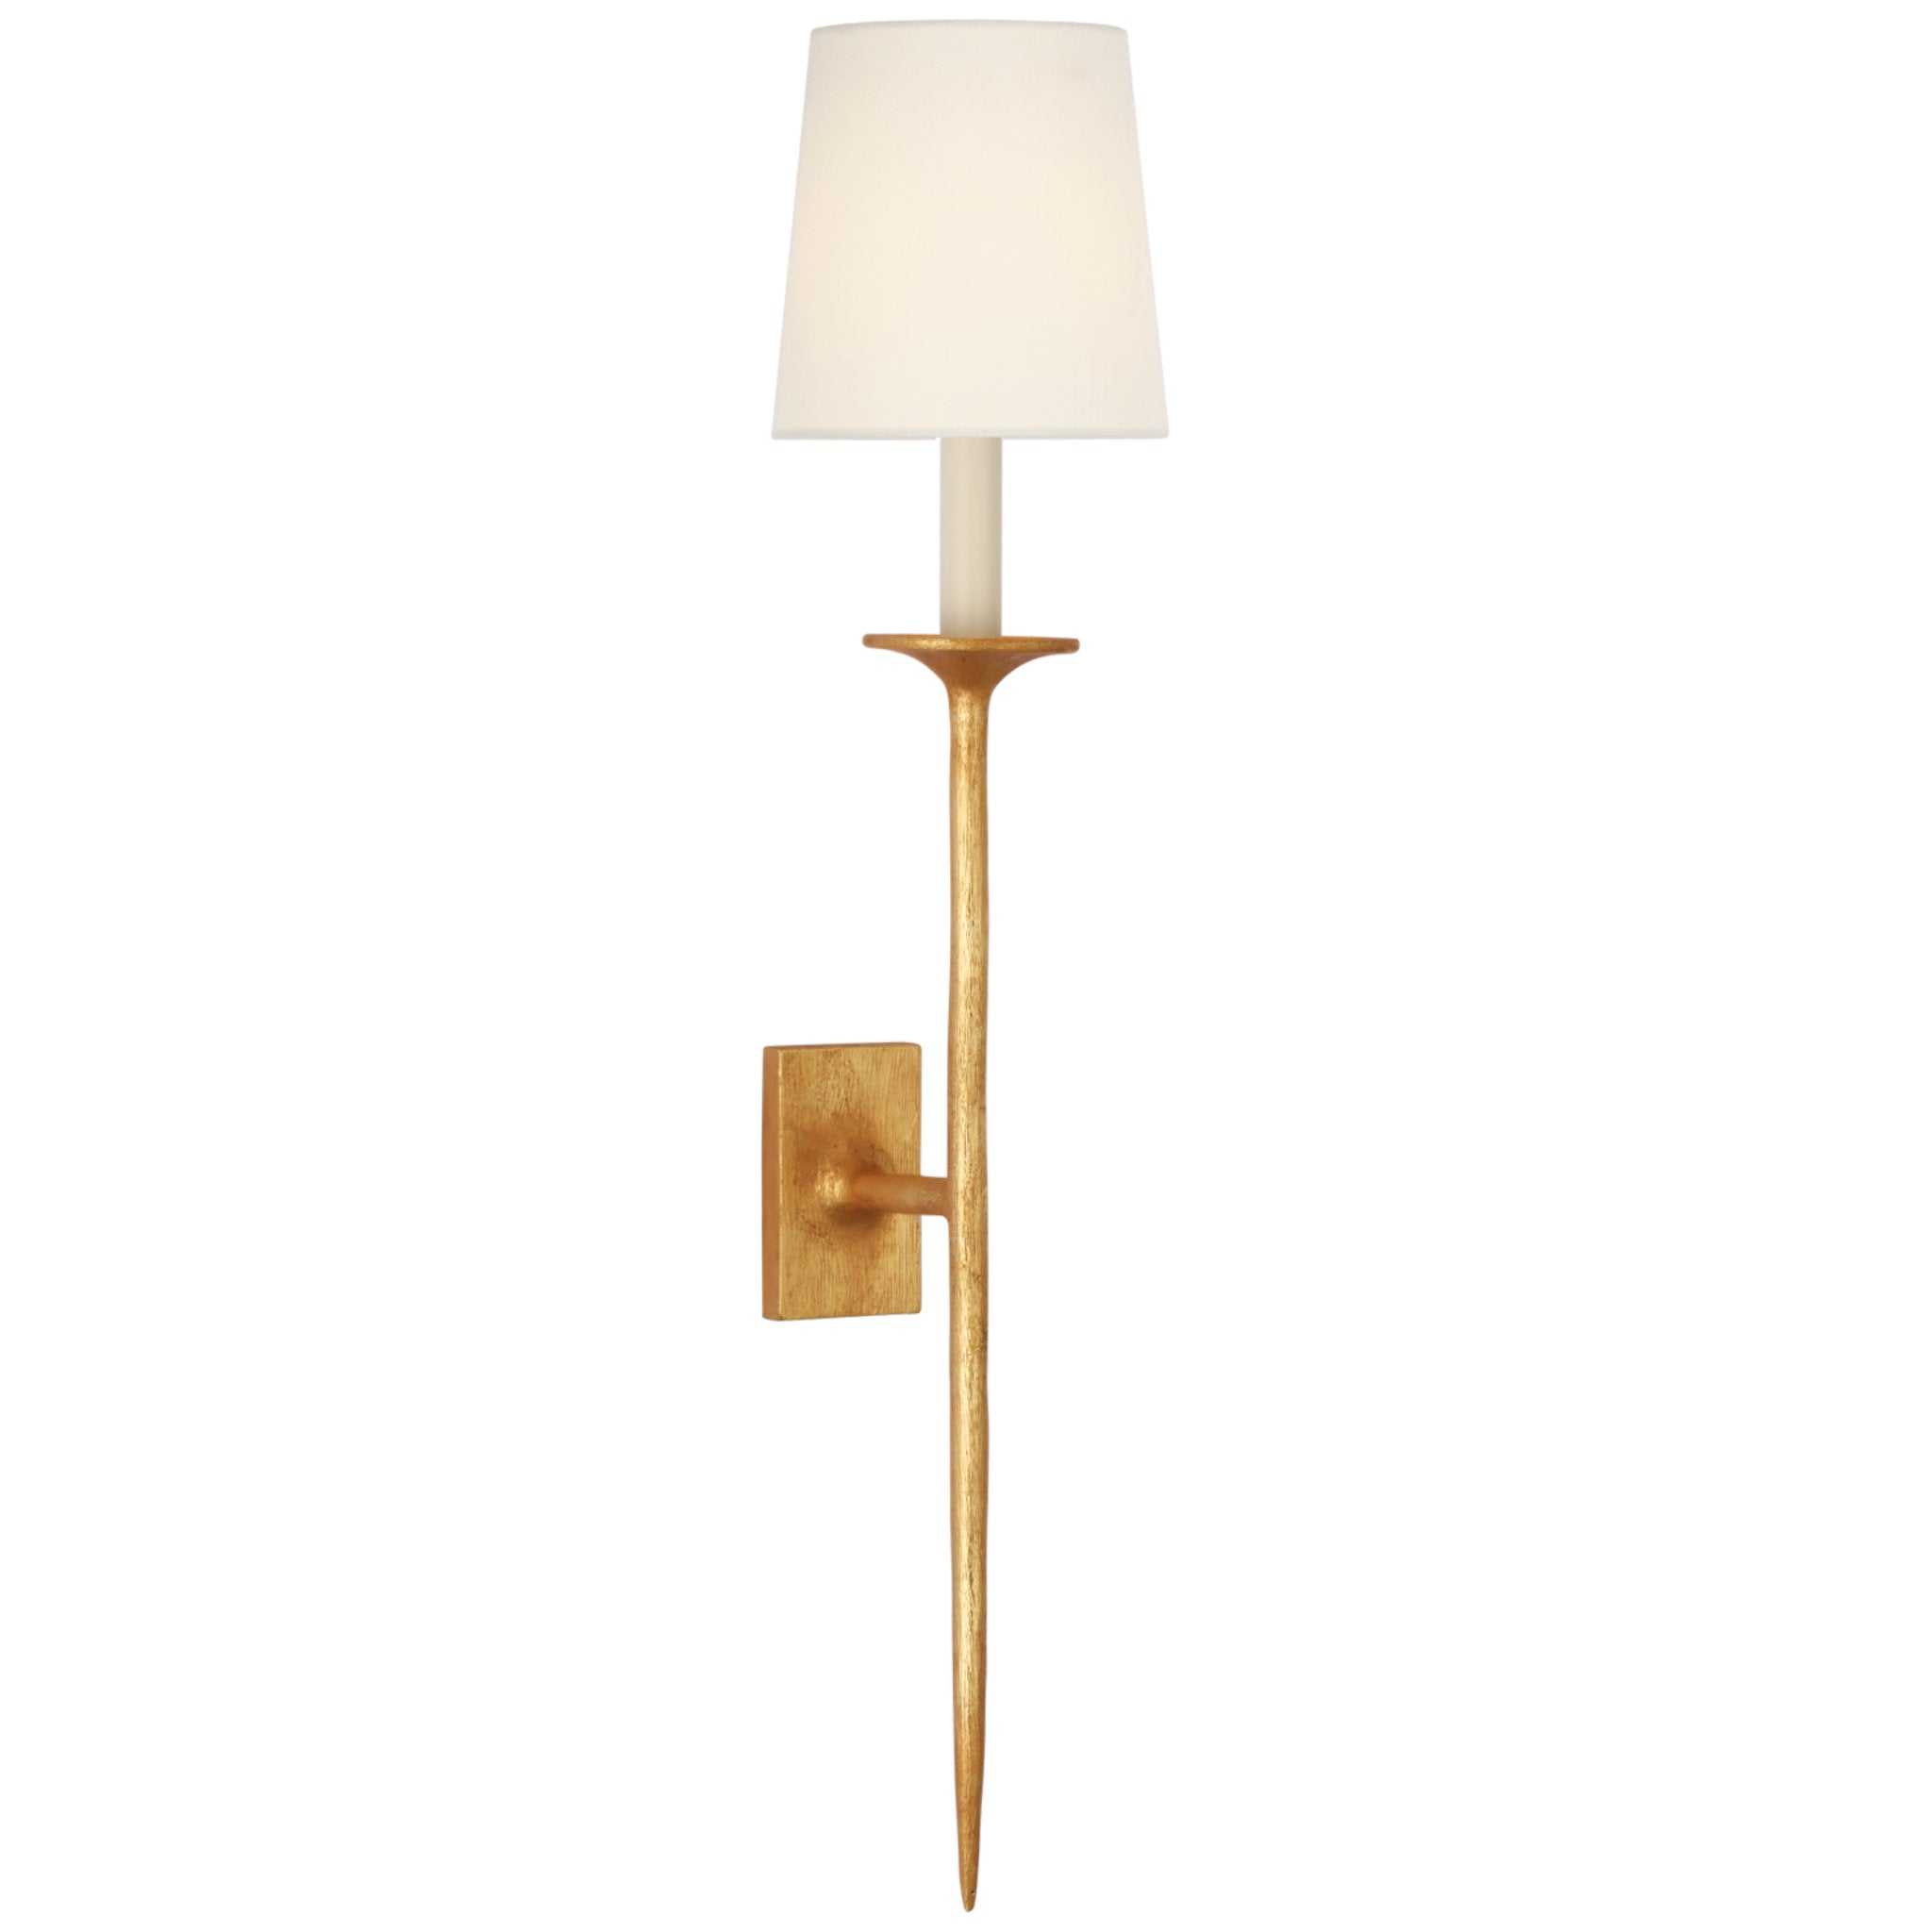 Julie Neill Catina Large Tail Sconce in Antique Gold Leaf with Linen Shade